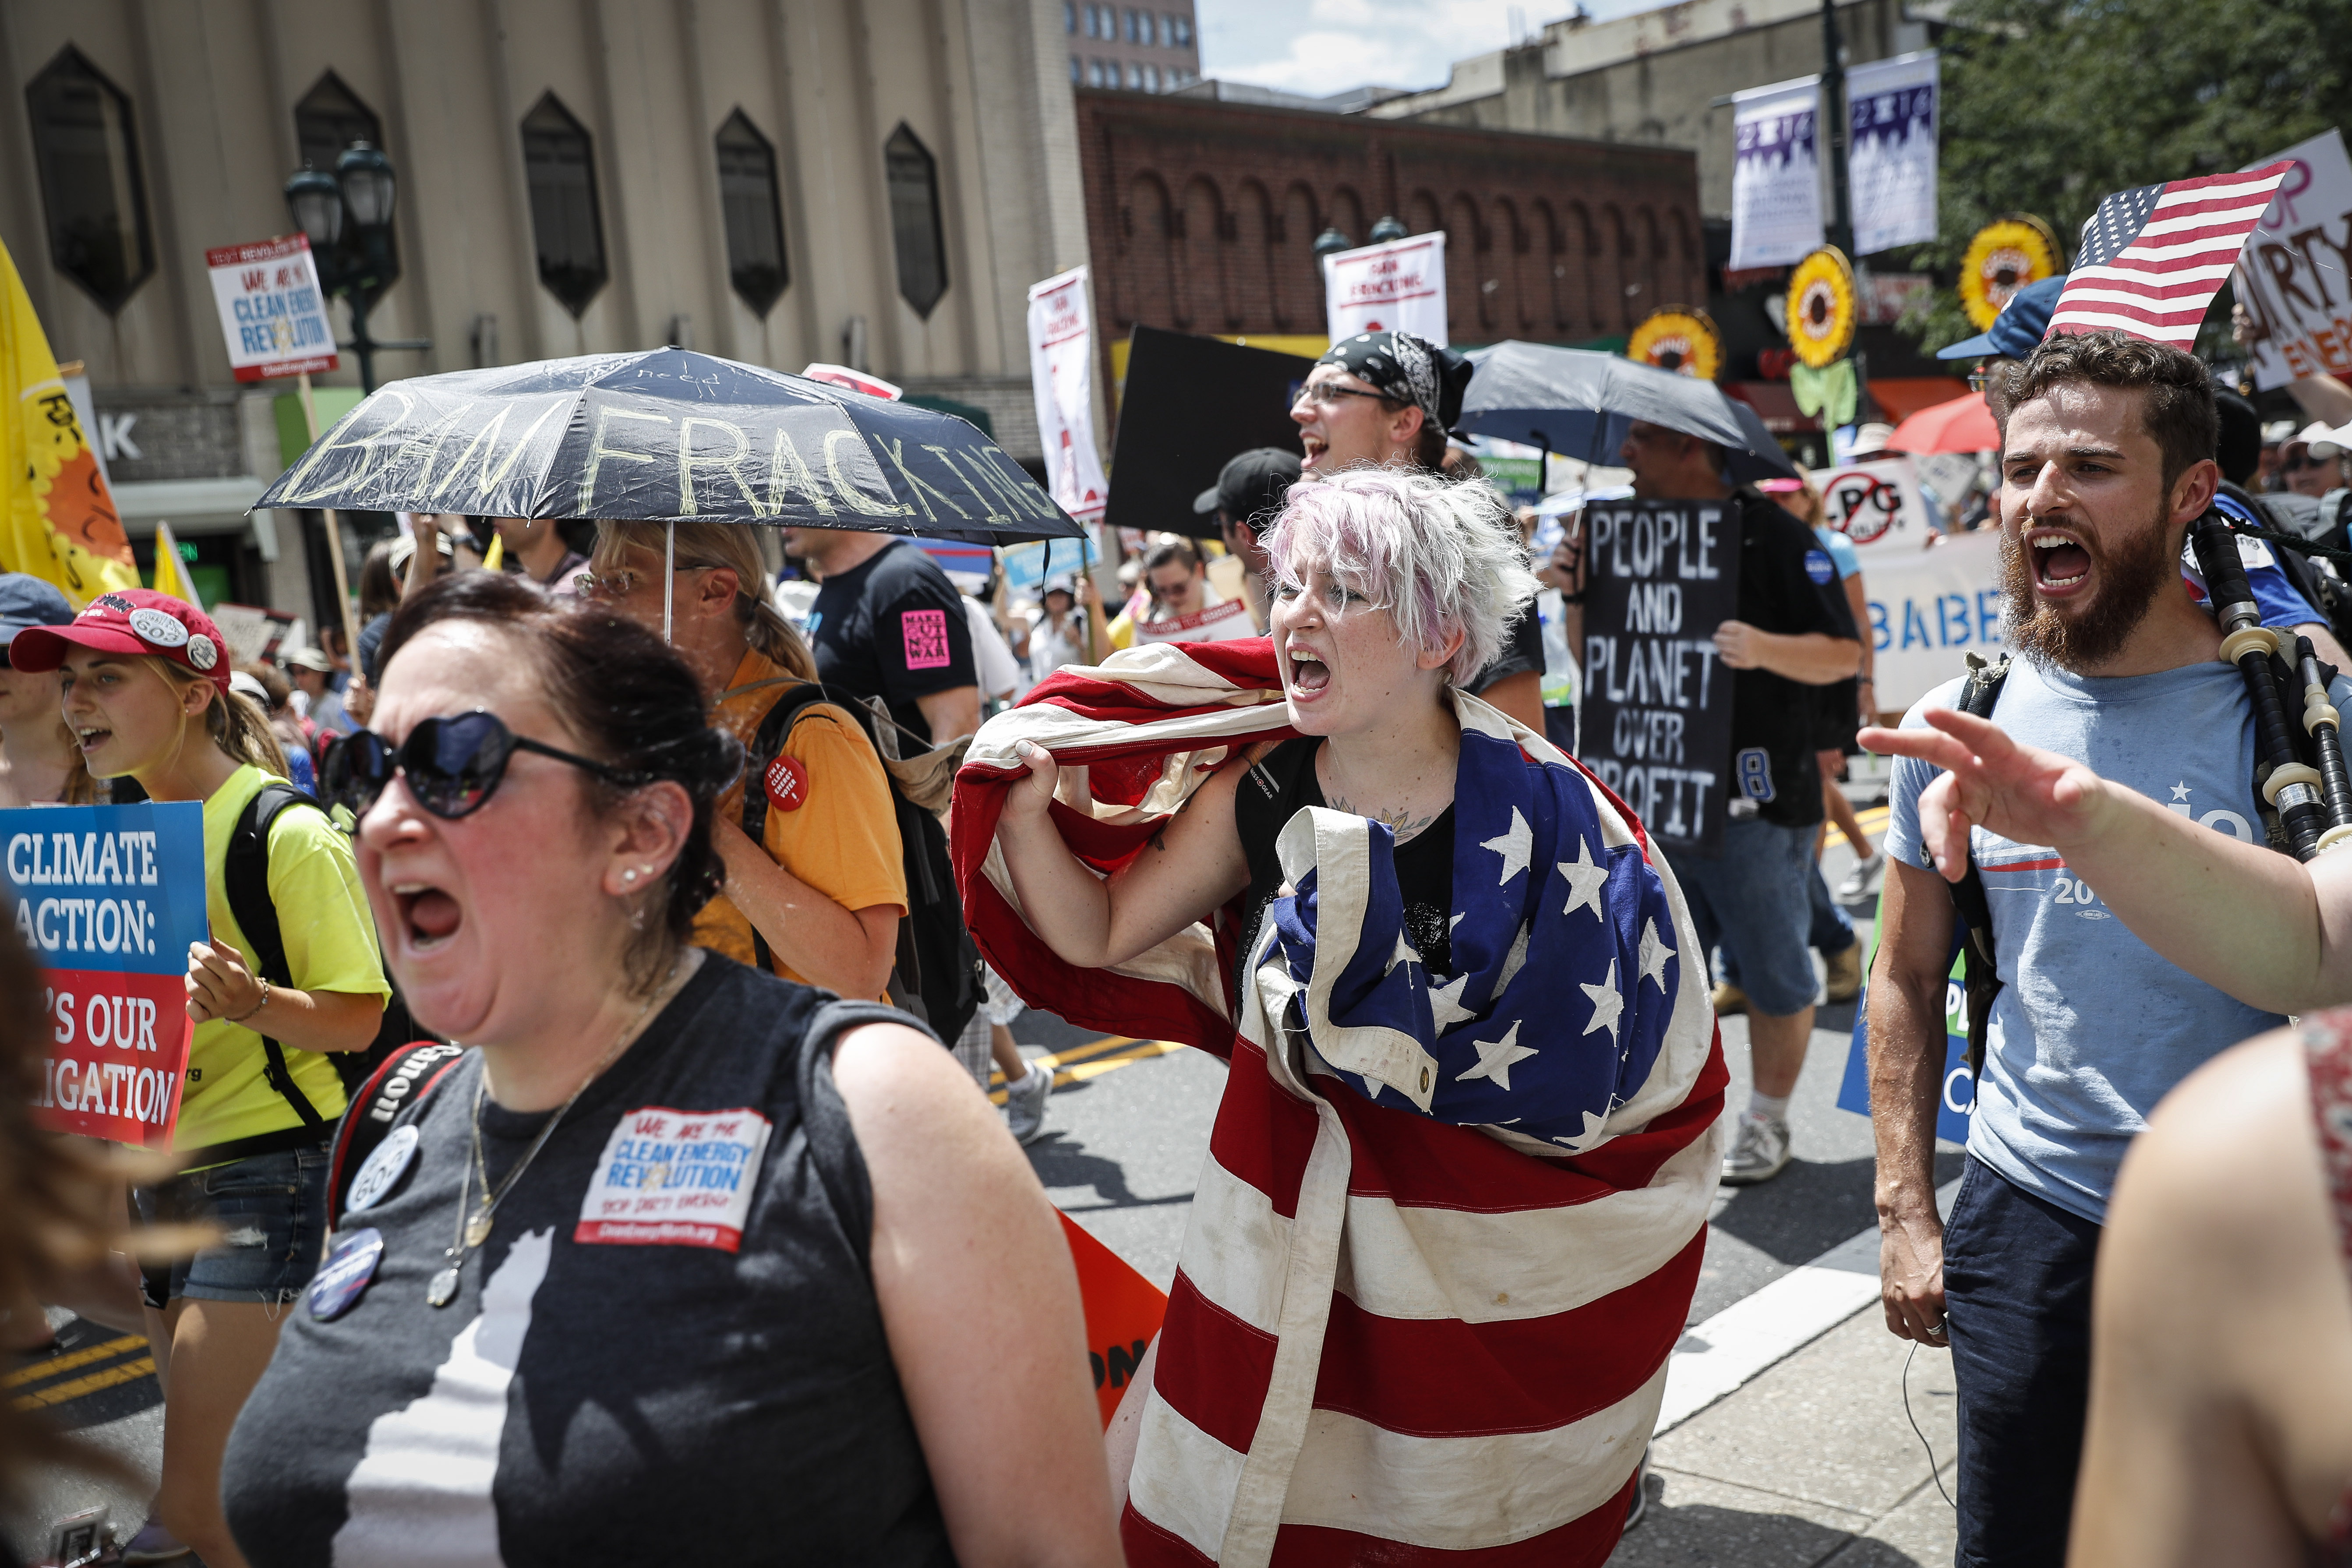 Protesters yell during a demonstration in downtown on Sunday, July 24, 2016, in Philadelphia. The Democratic National Convention starts Monday. (AP Photo/John Minchillo)